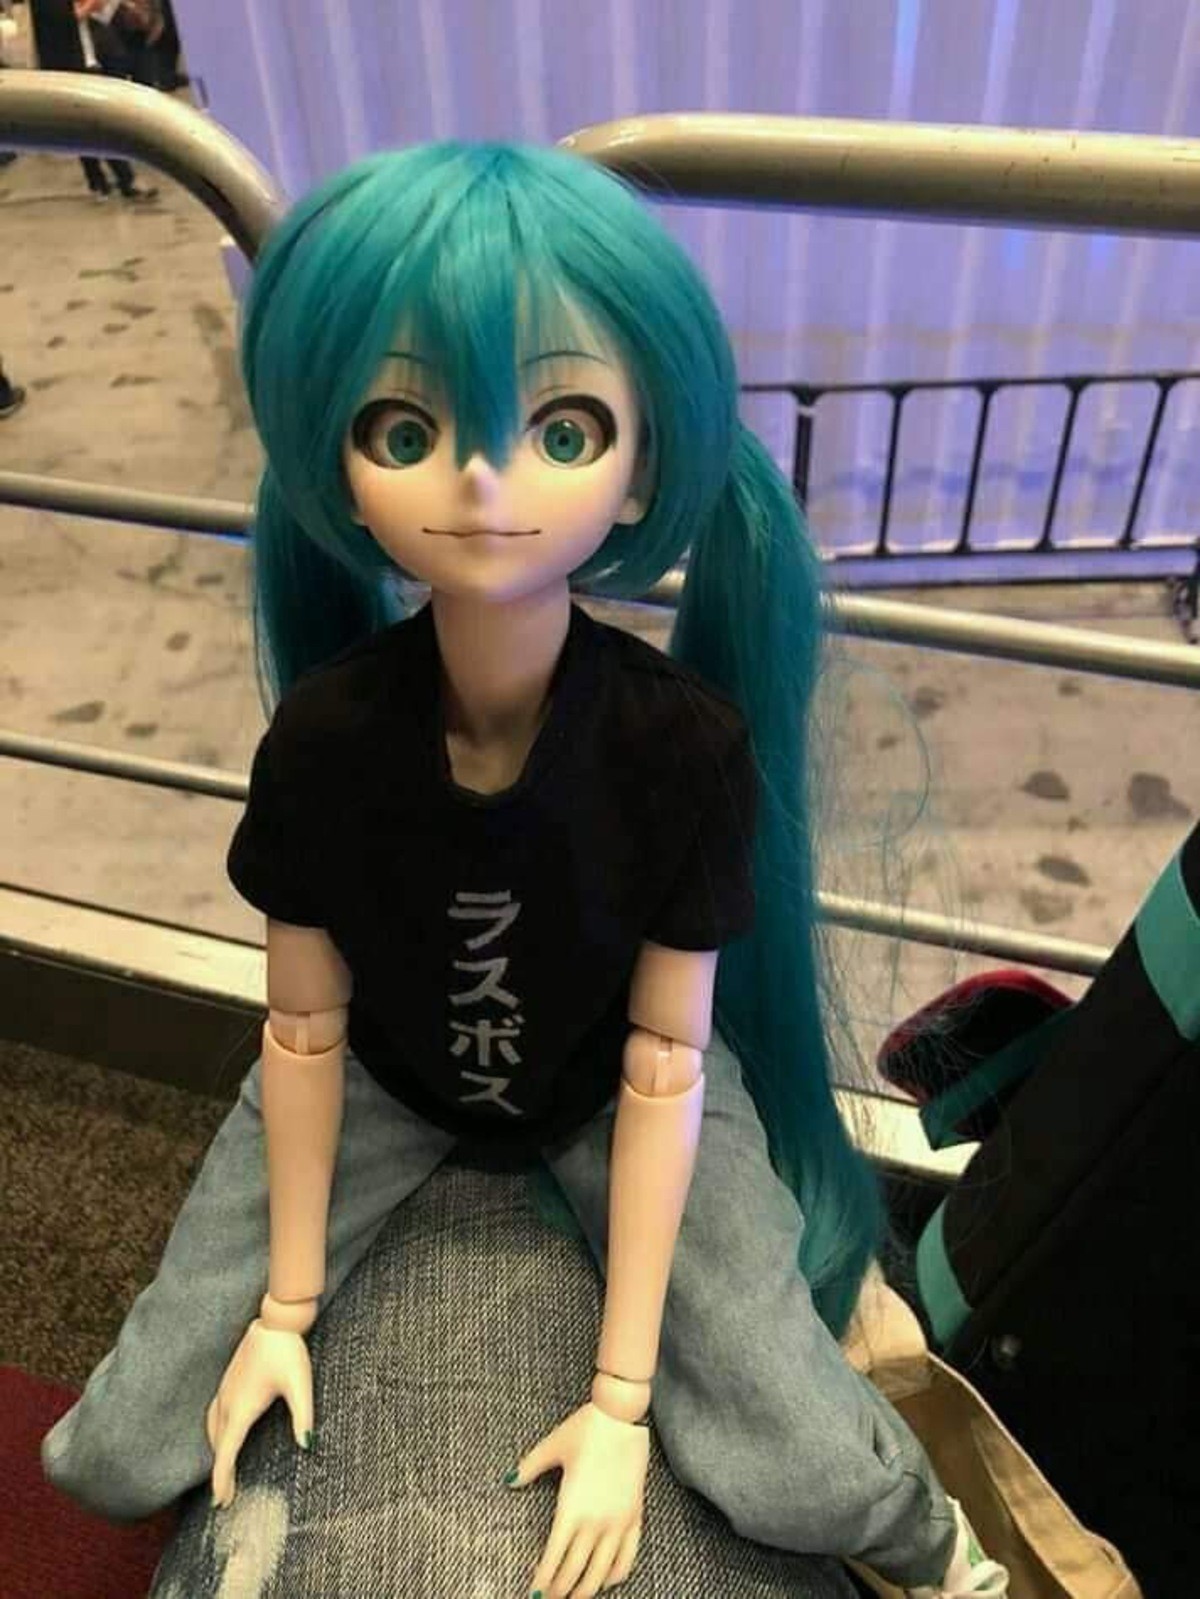 cursed doll images